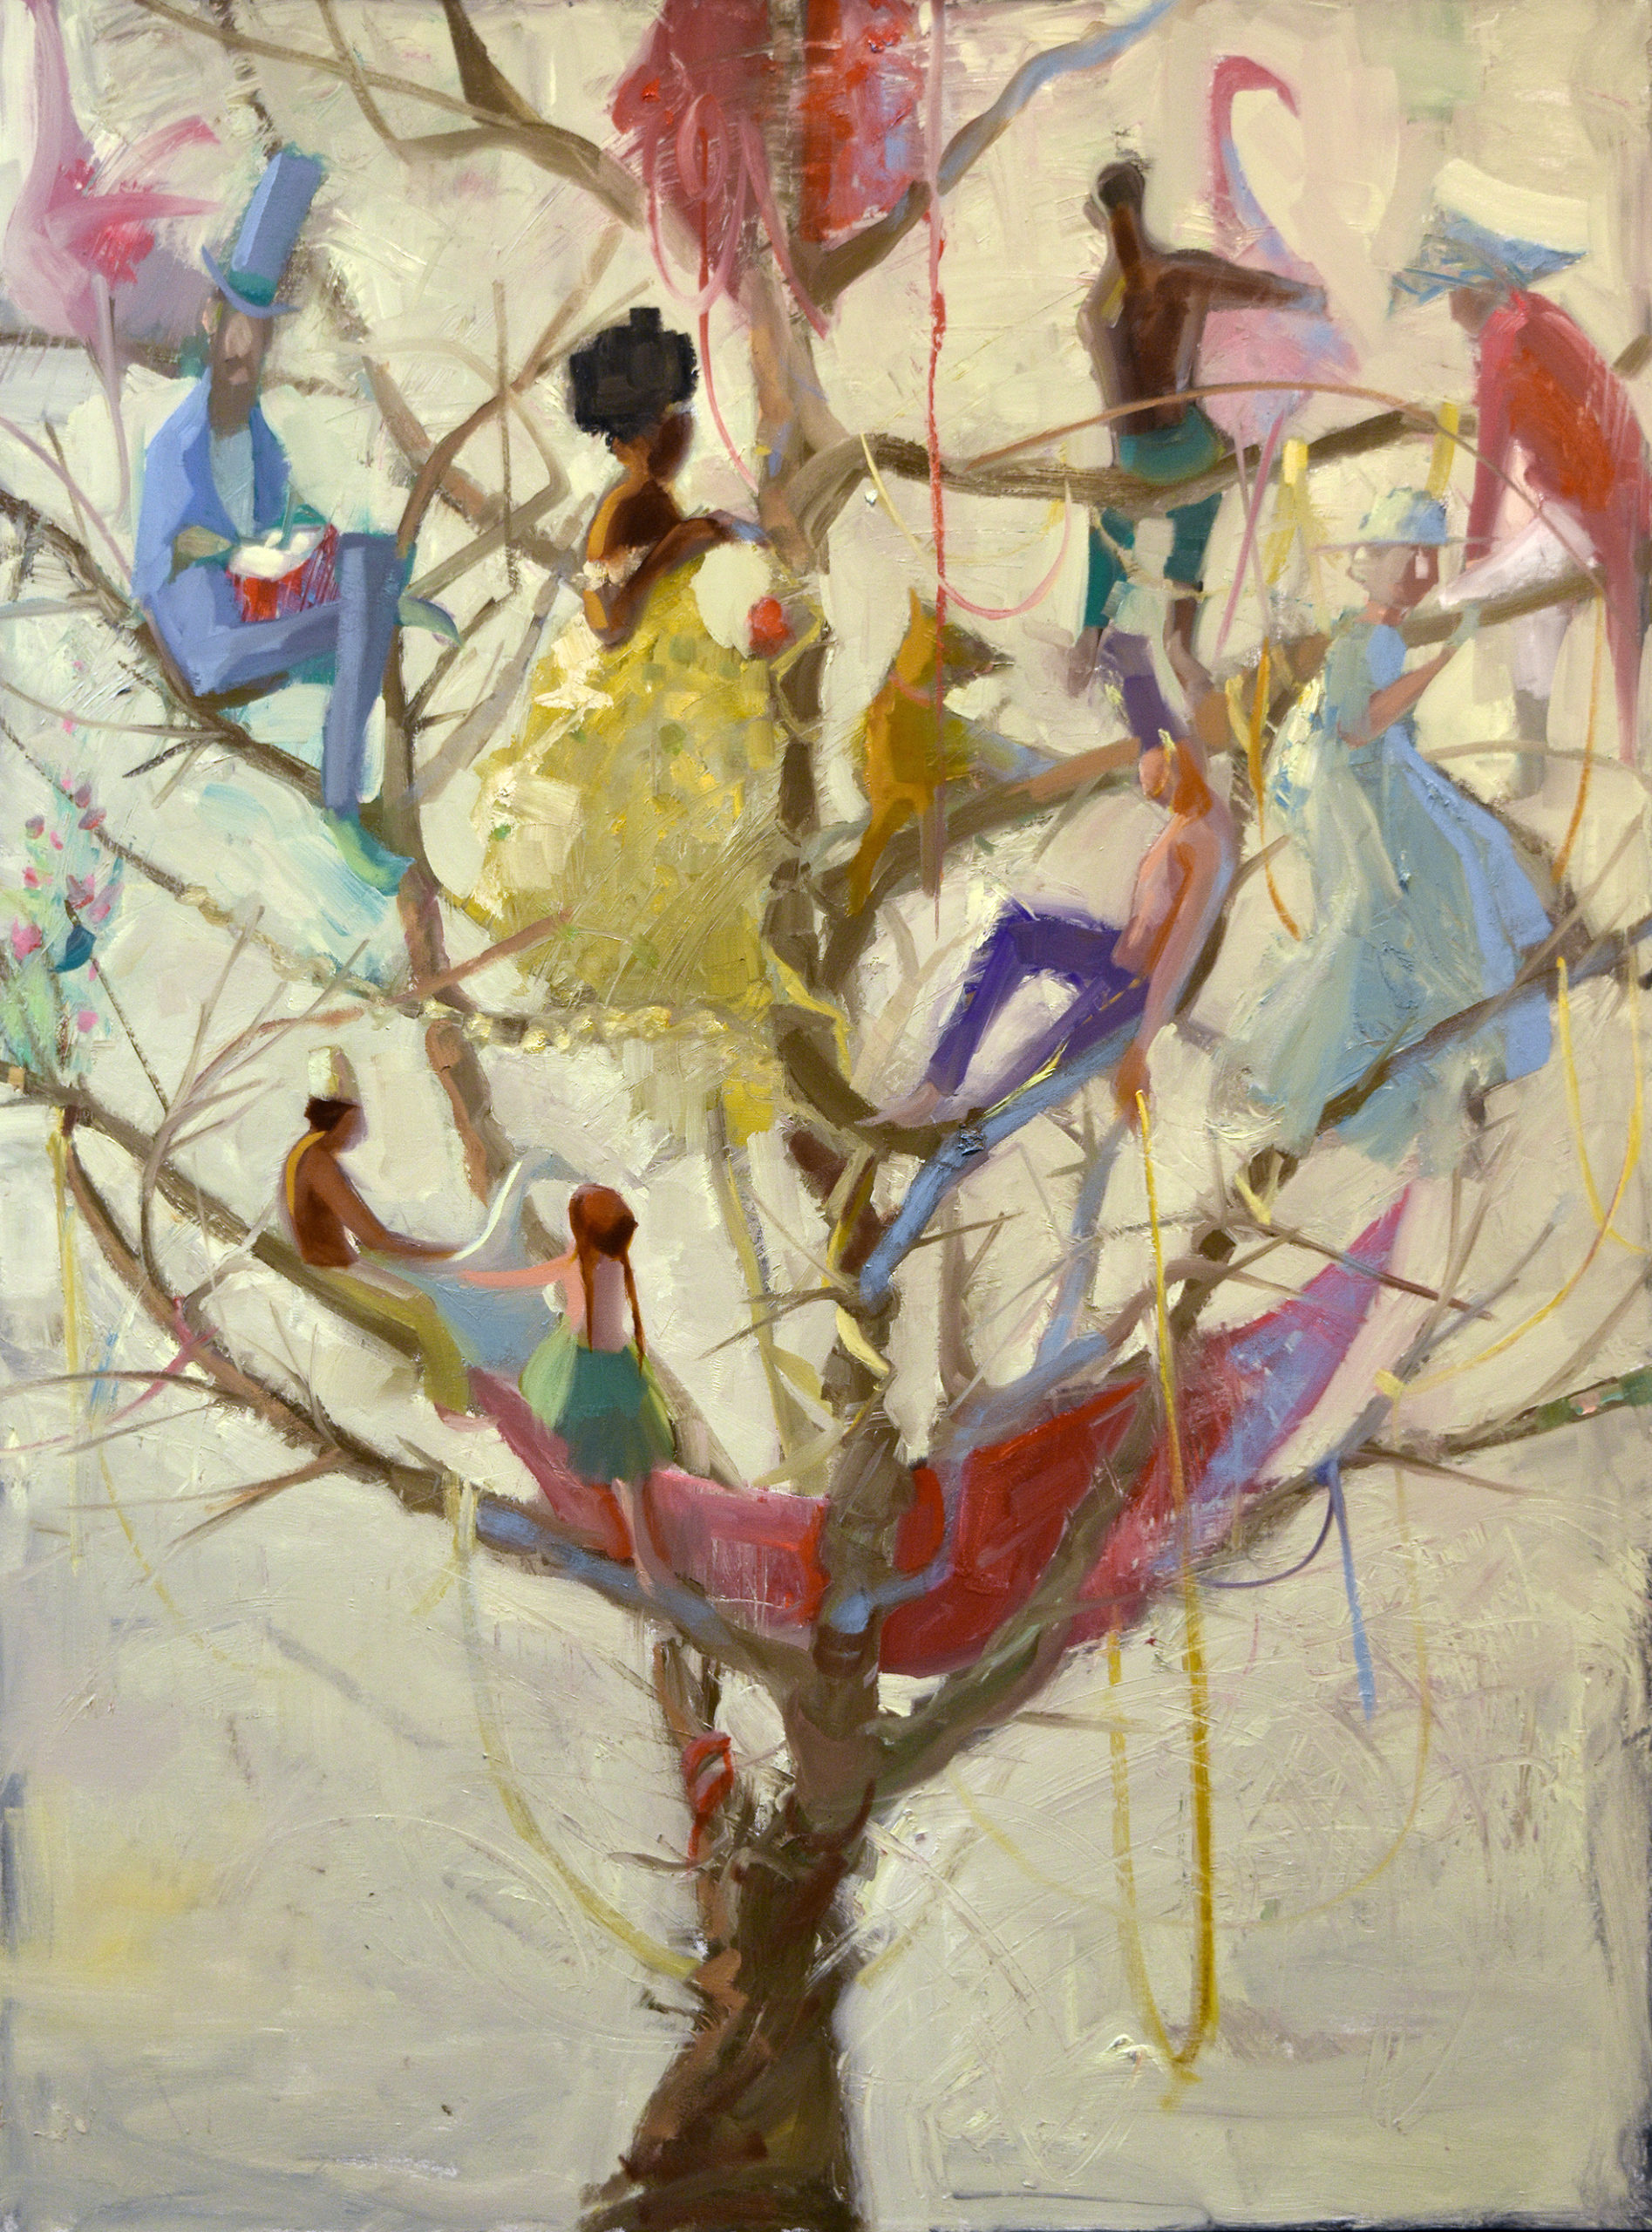 vibrantly dressed people lounge in tree strewn with multicolored garlands